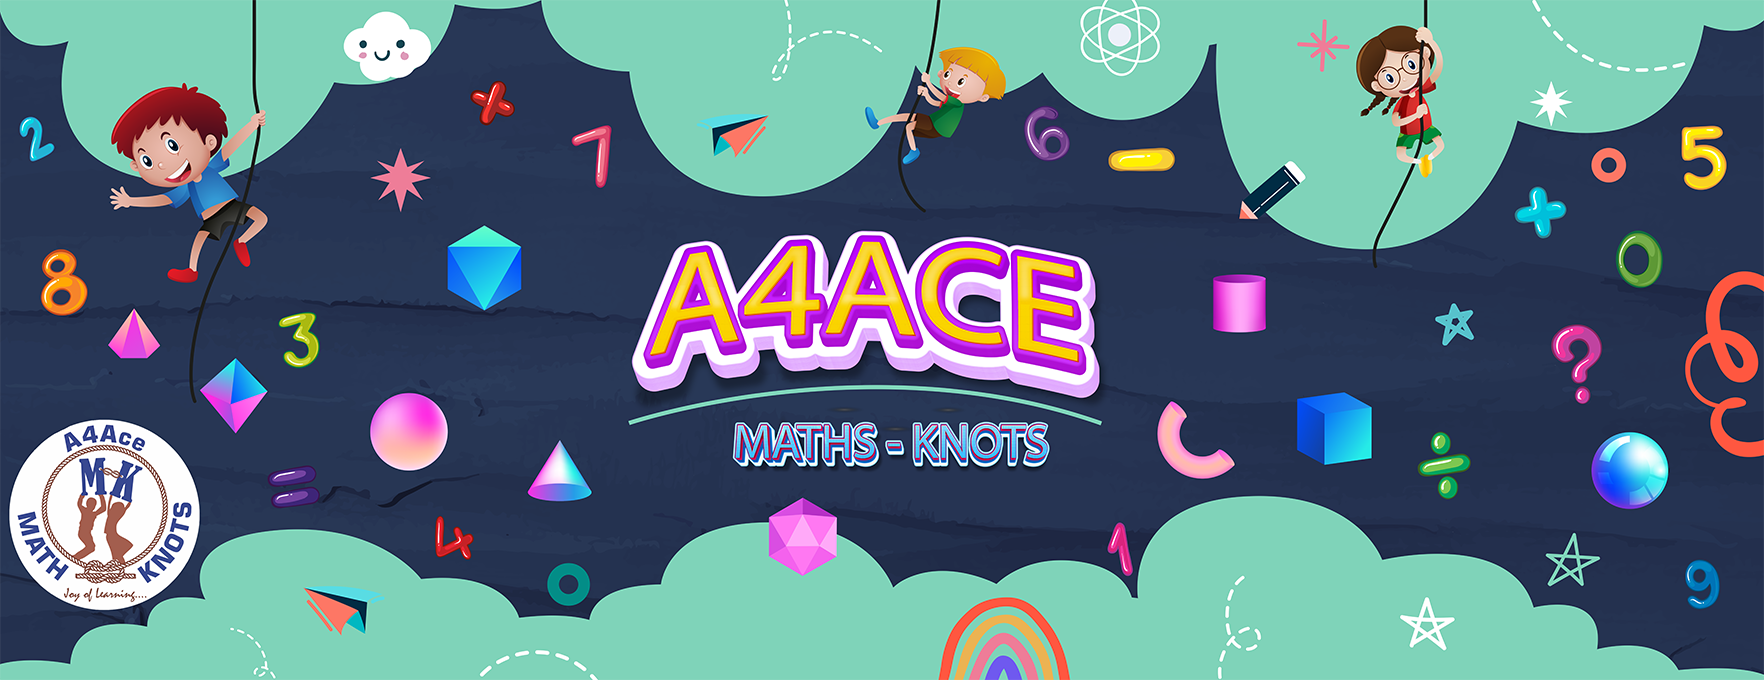  a4ace|Learn to Think | Advanced Math : Pre-K to 12 | Gifted Placement Tests 